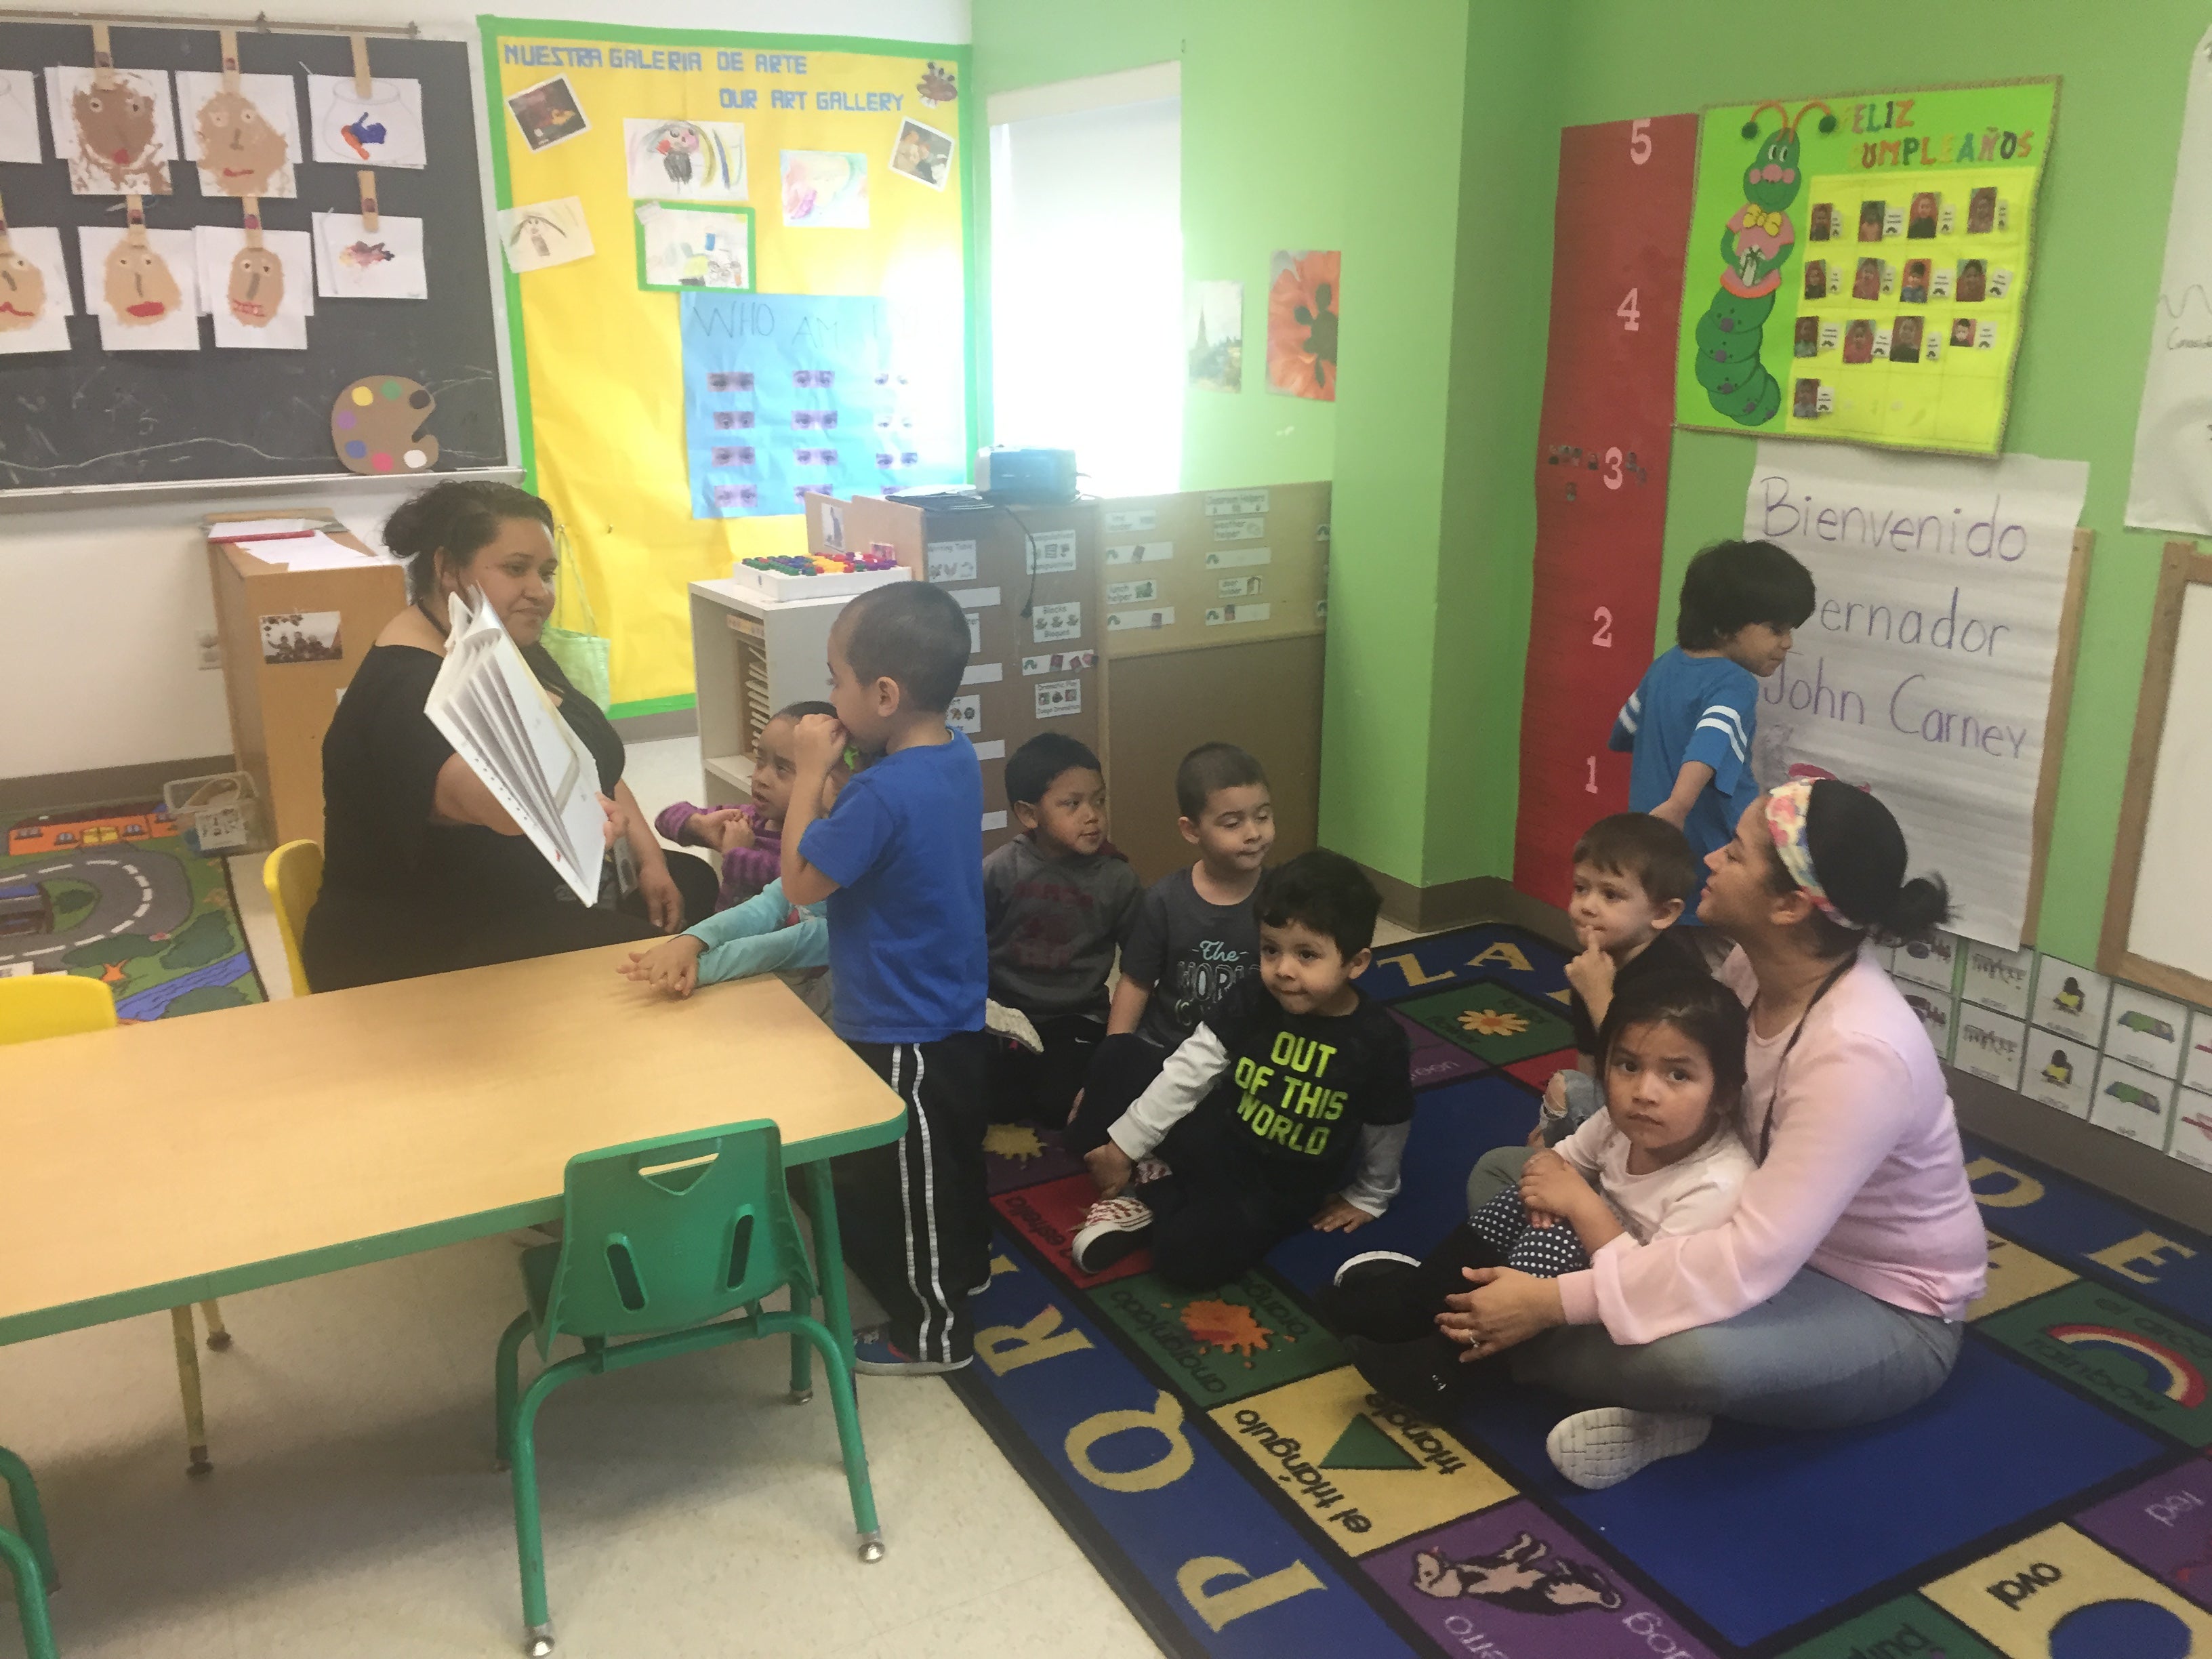  A new $7.6 million federal grant will help Delaware fund learning programs low-income preschoolers like this one at Wilmington's Latin American Community Center. (Cris Barrish/WHYY) 